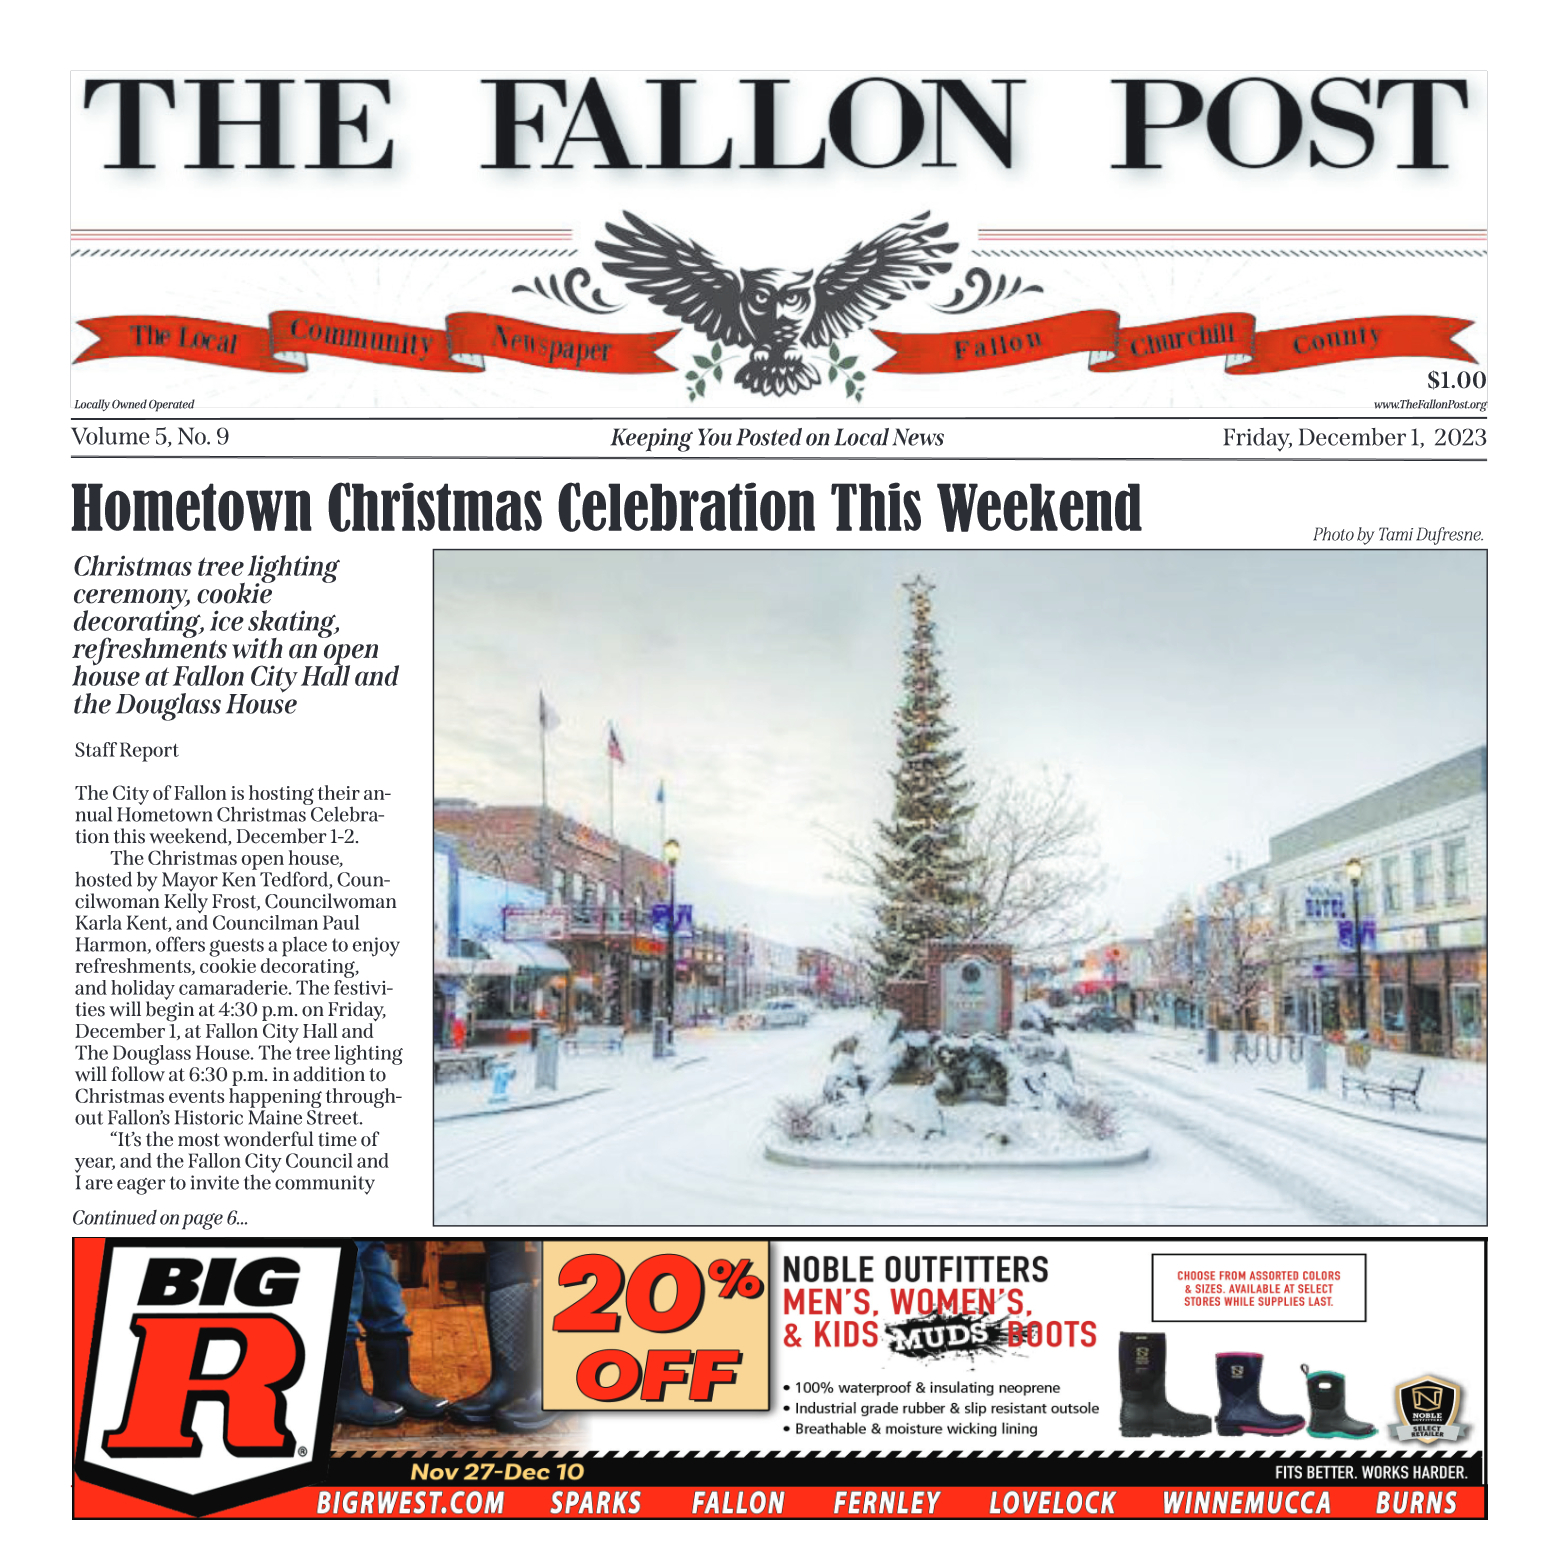 The Fallon Post Print Edition December 1, 2023 - page 1